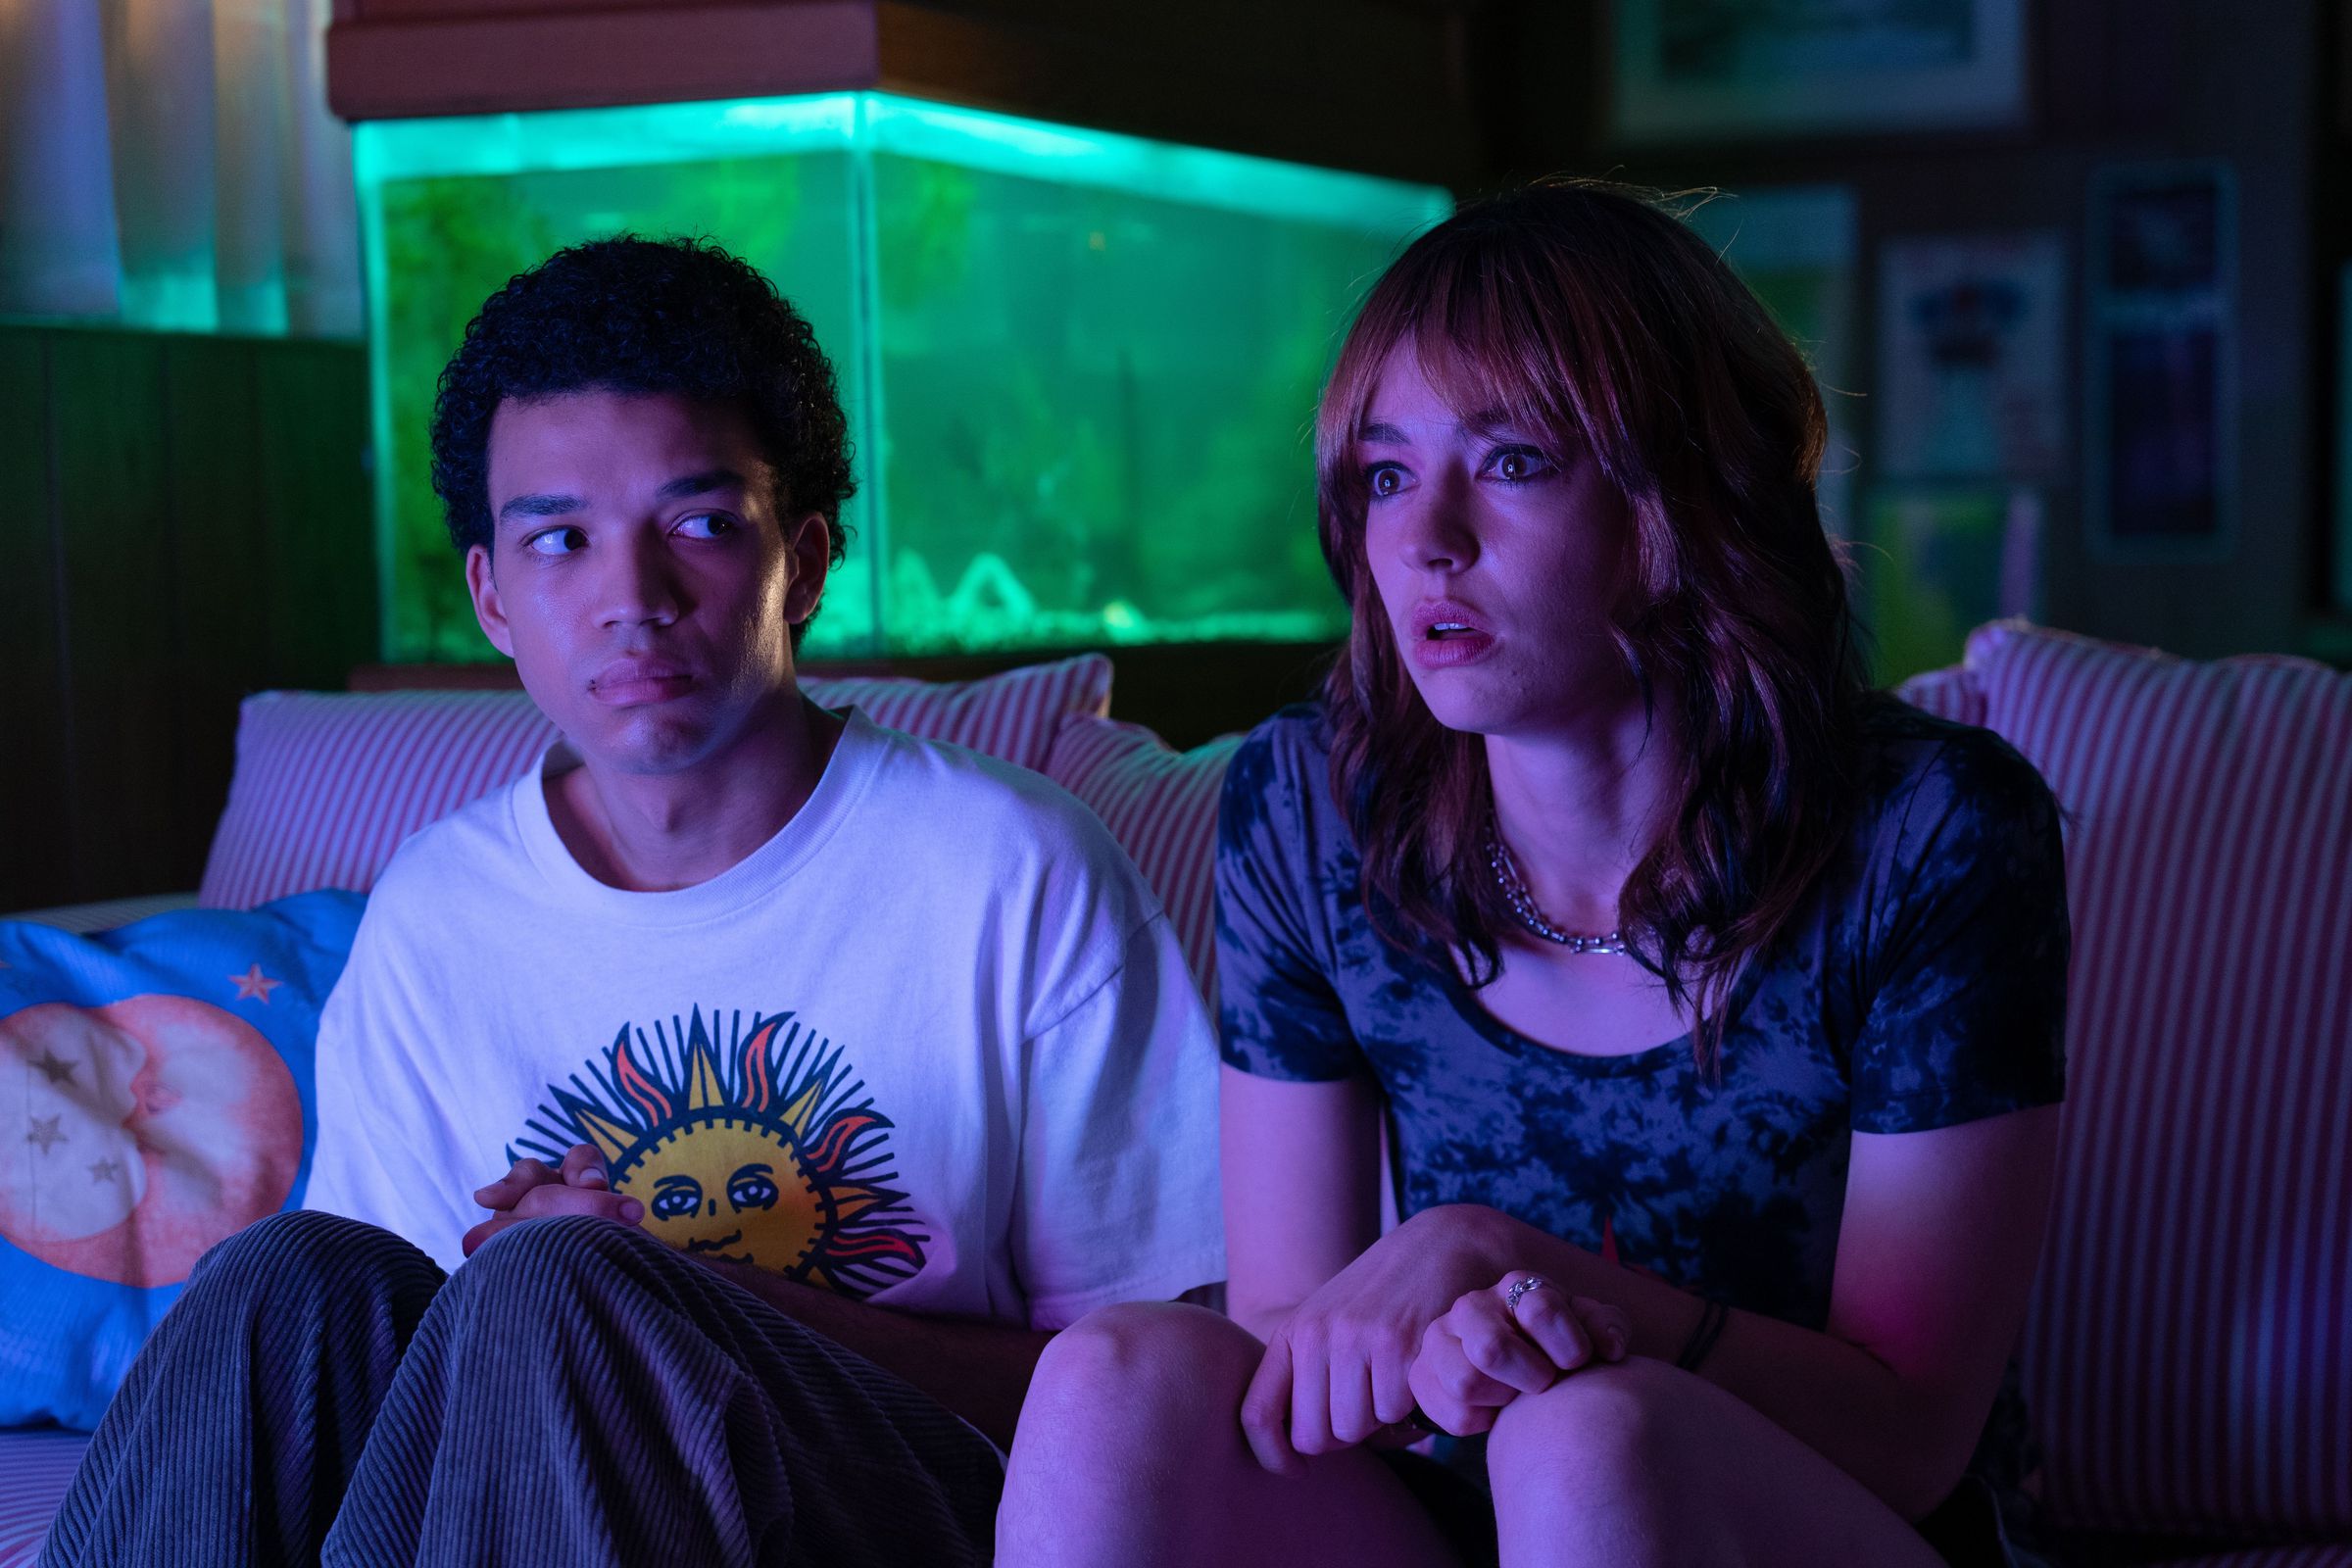 I Saw the TV Glow is a tribute to the transformative power of fandom